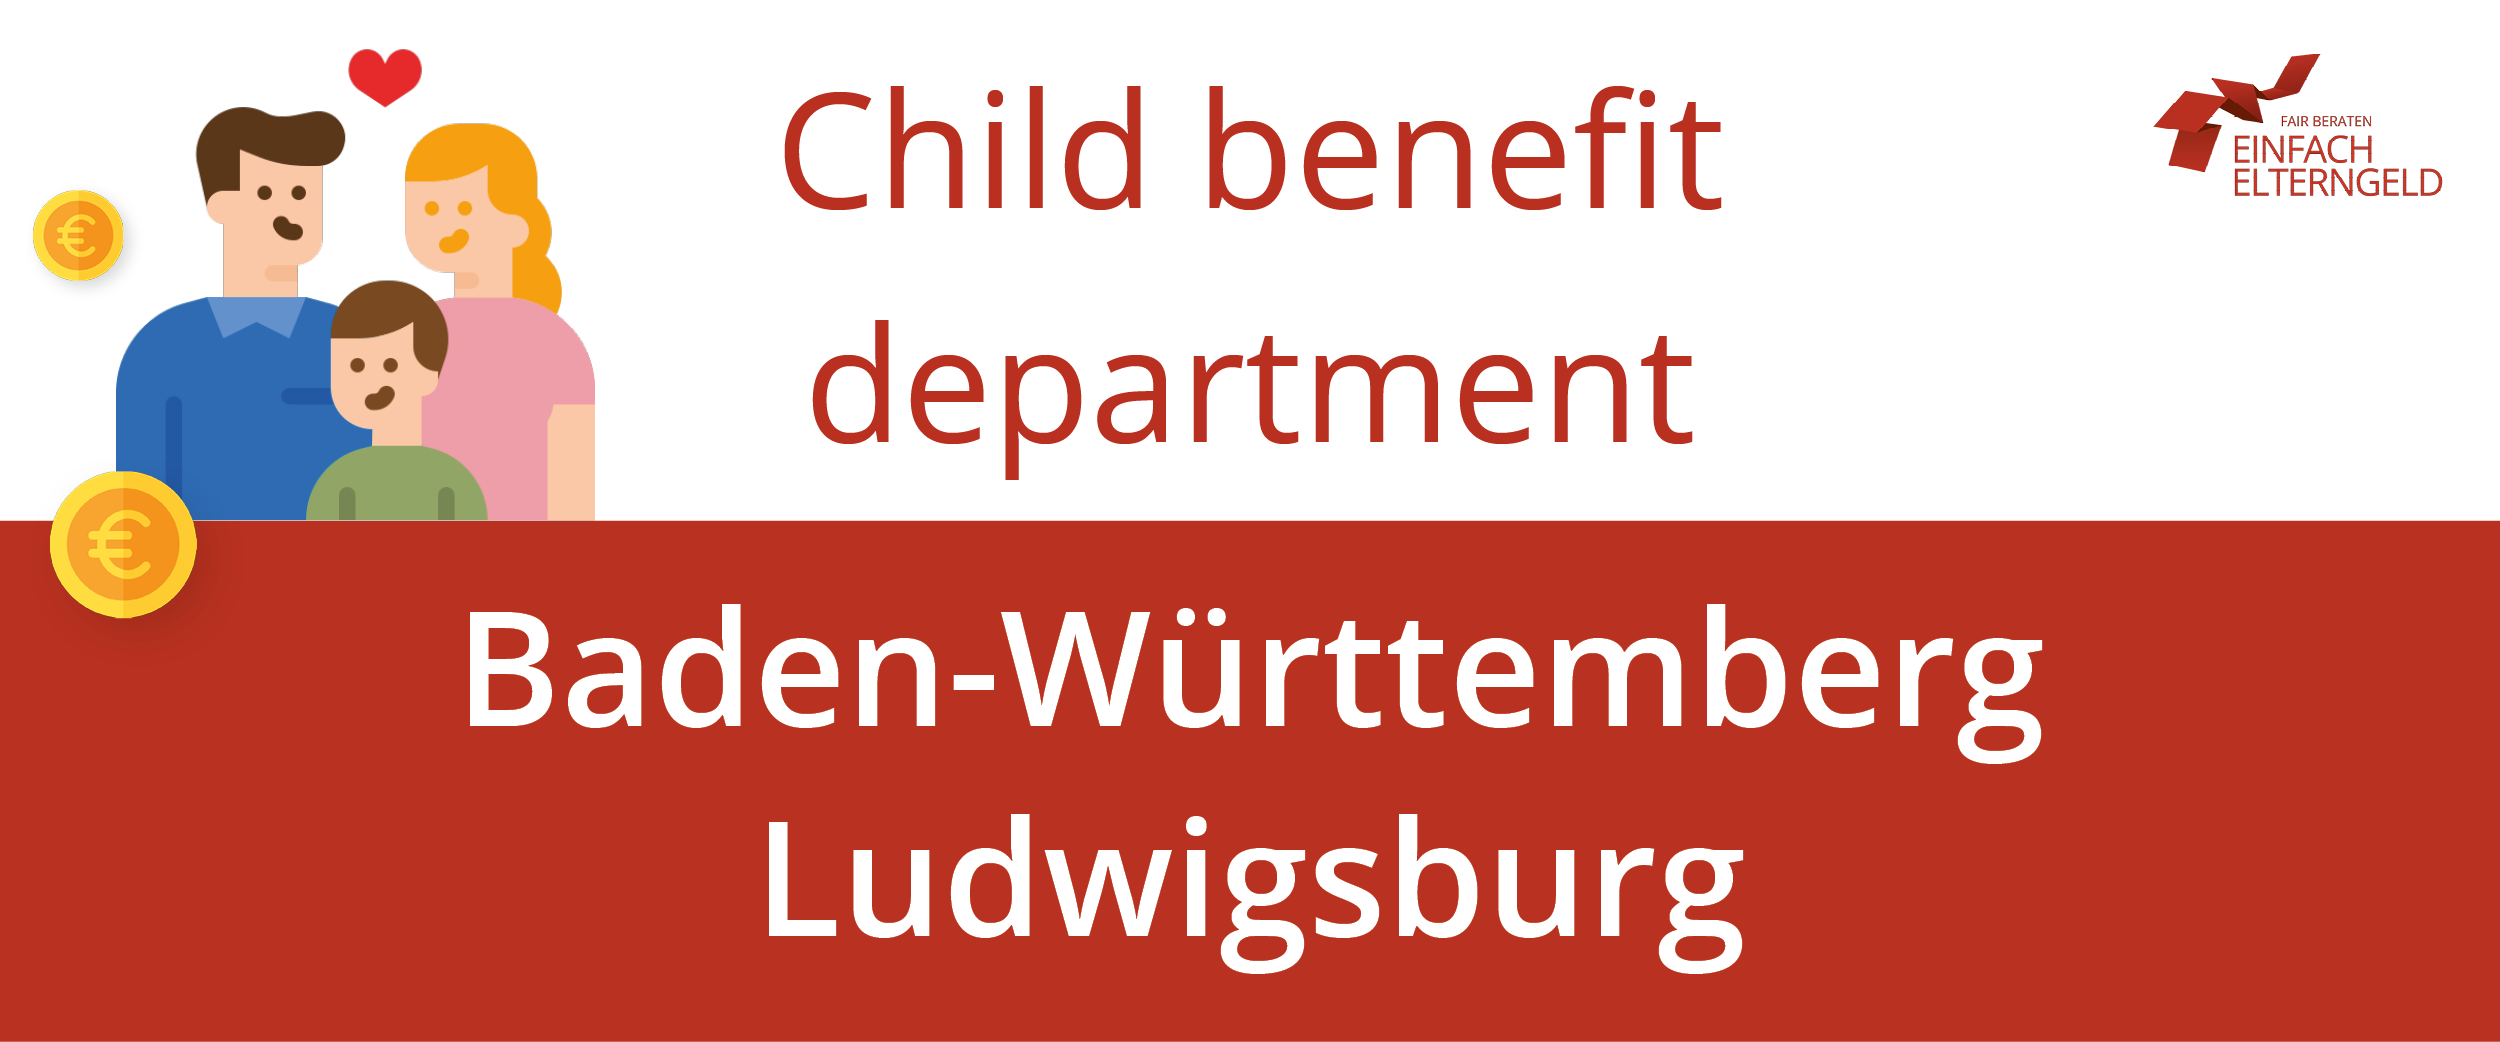 We present you the Child benefit department Baden-Württemberg Ludwigsburg.